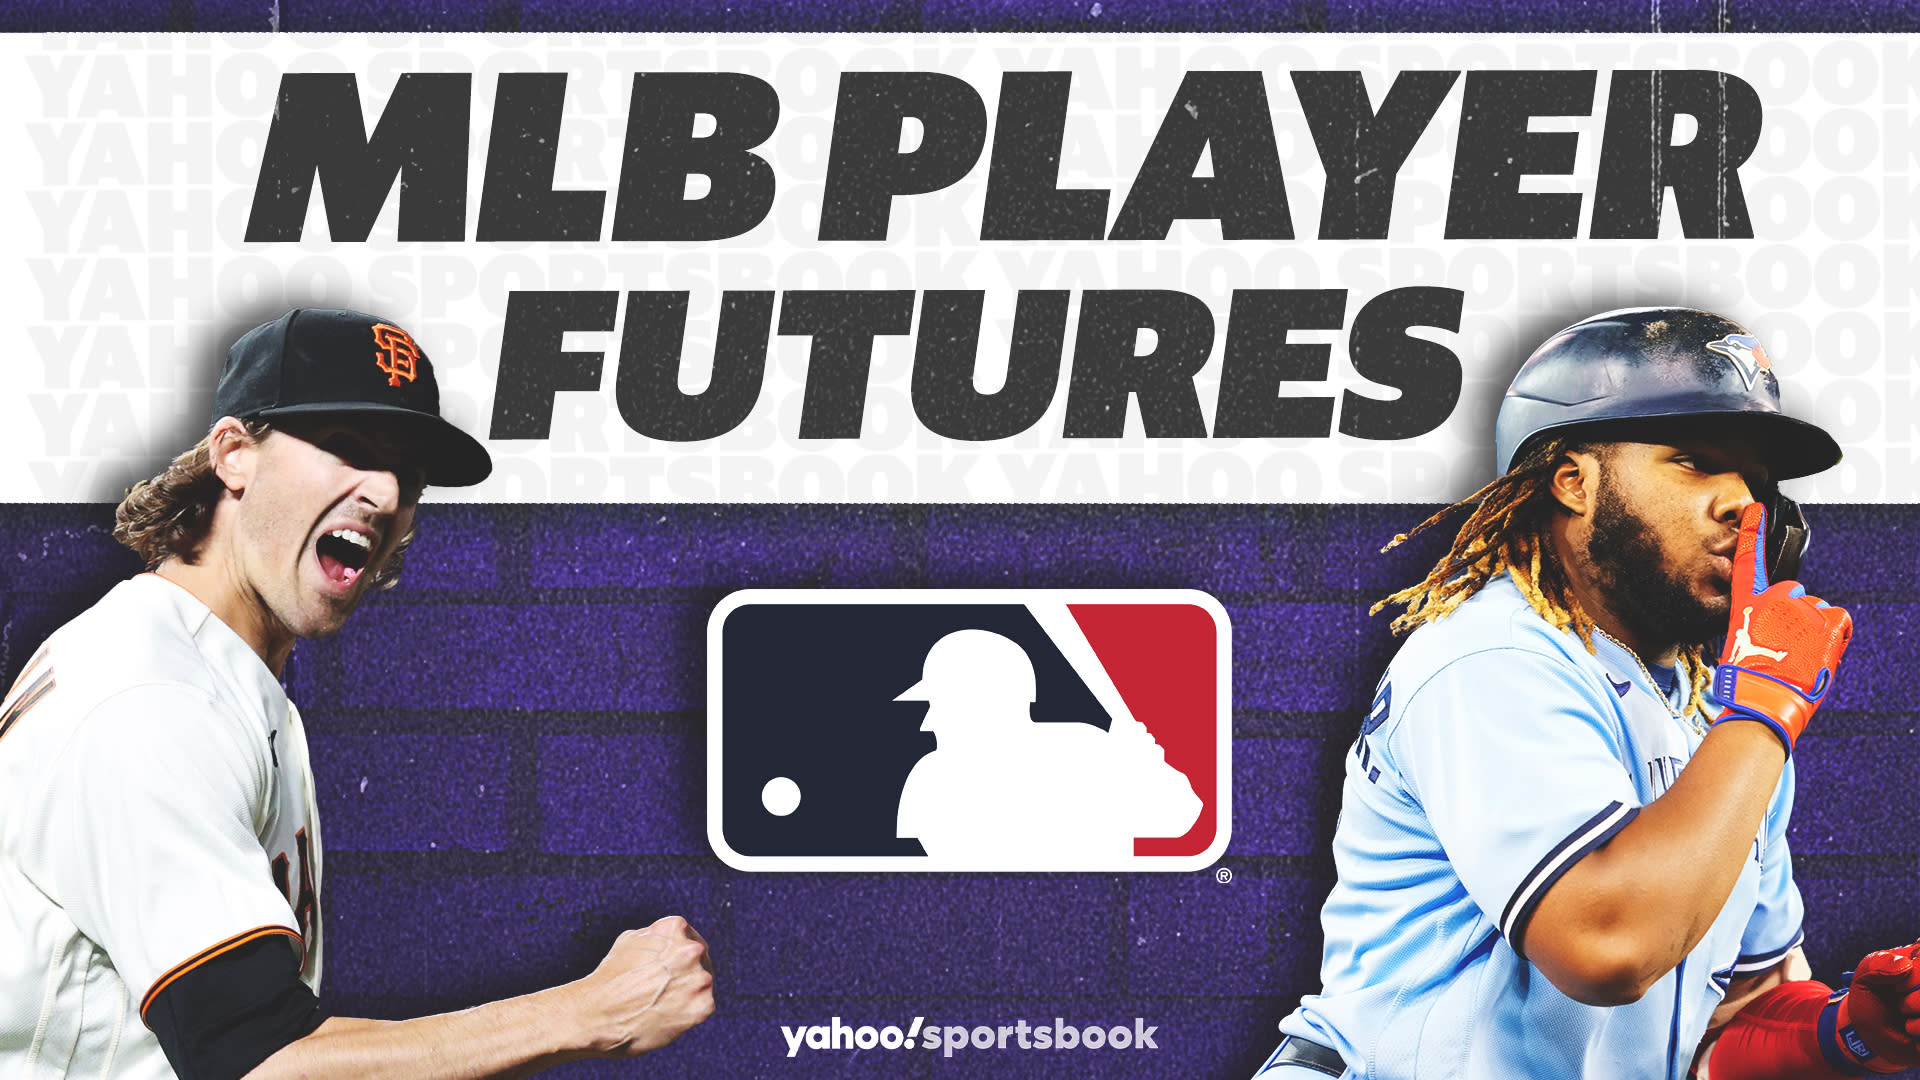 Oh good, another streaming service is getting exclusive MLB games